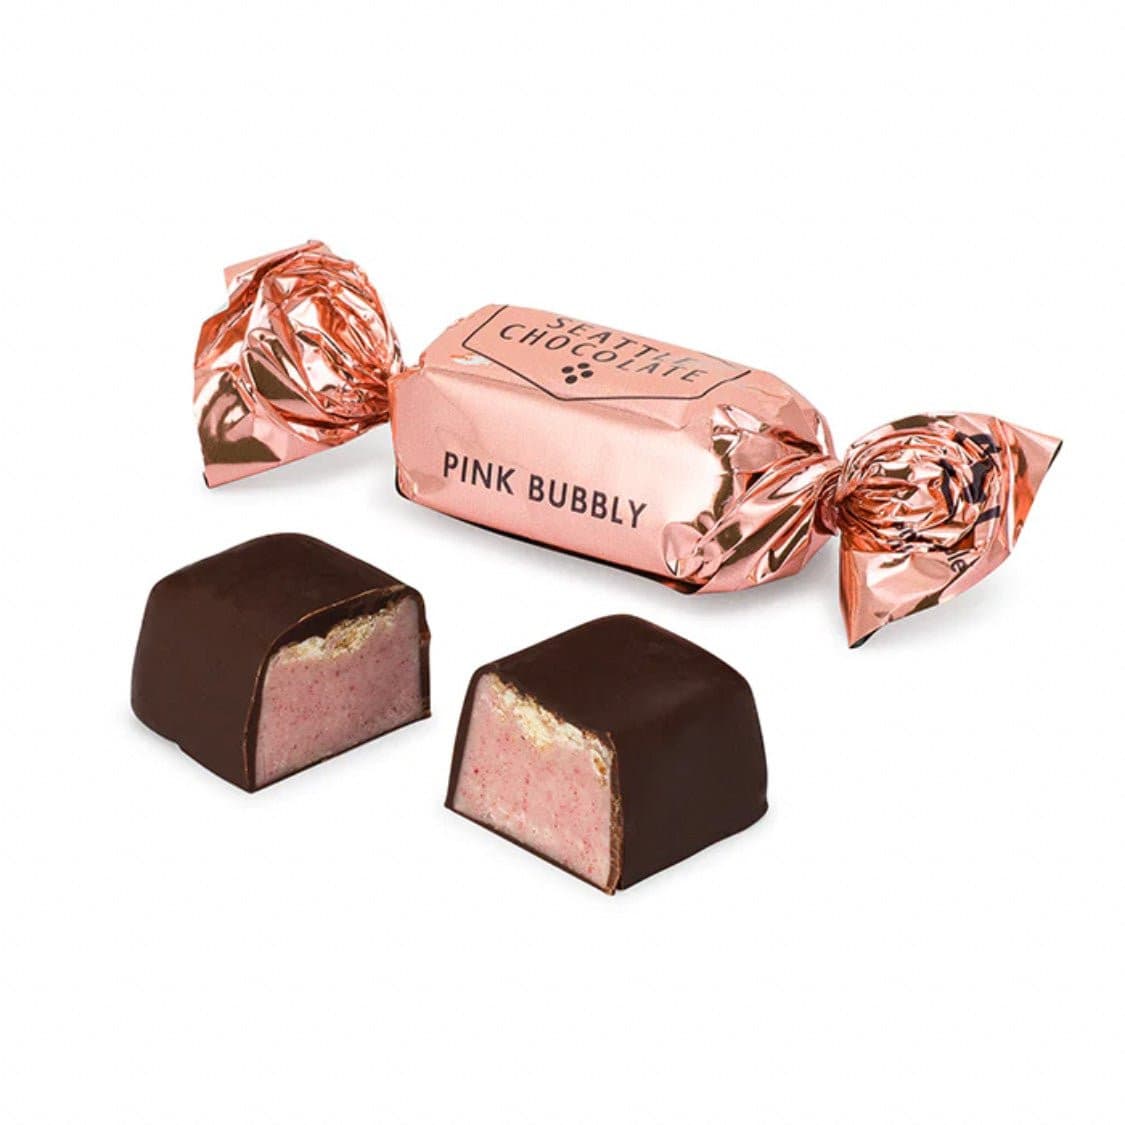 Individual pink bubbly chocolate truffles from Seattle Chocolate